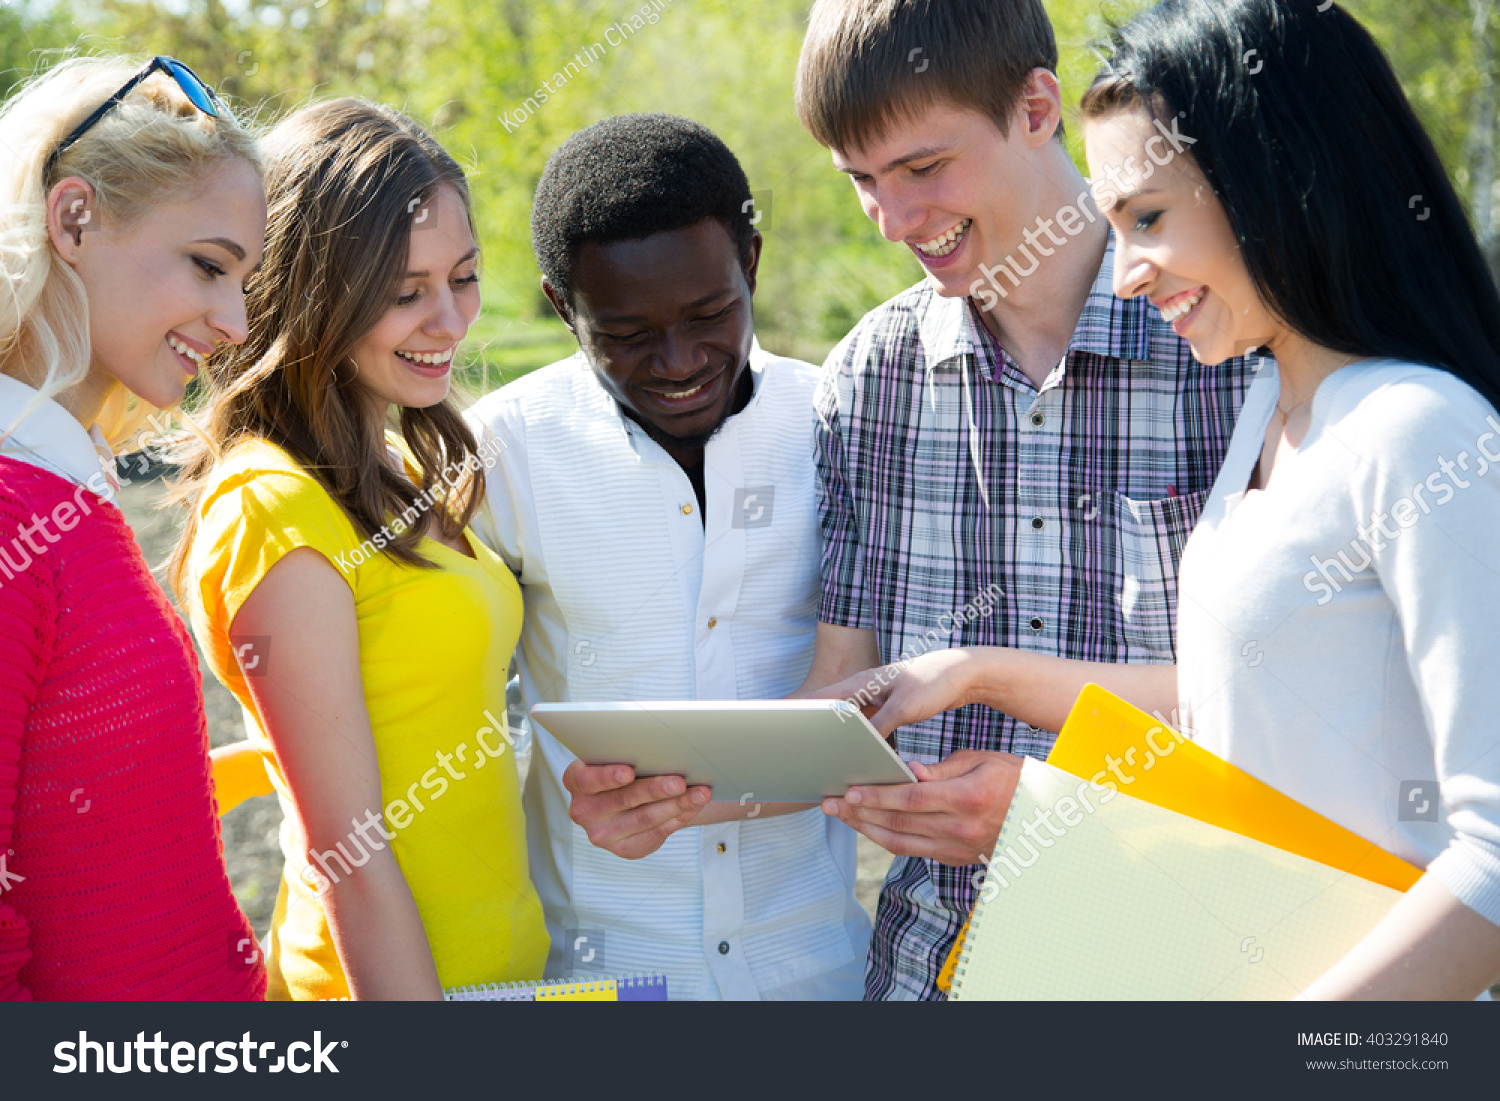 Group of student with notebook outdoor #403291840